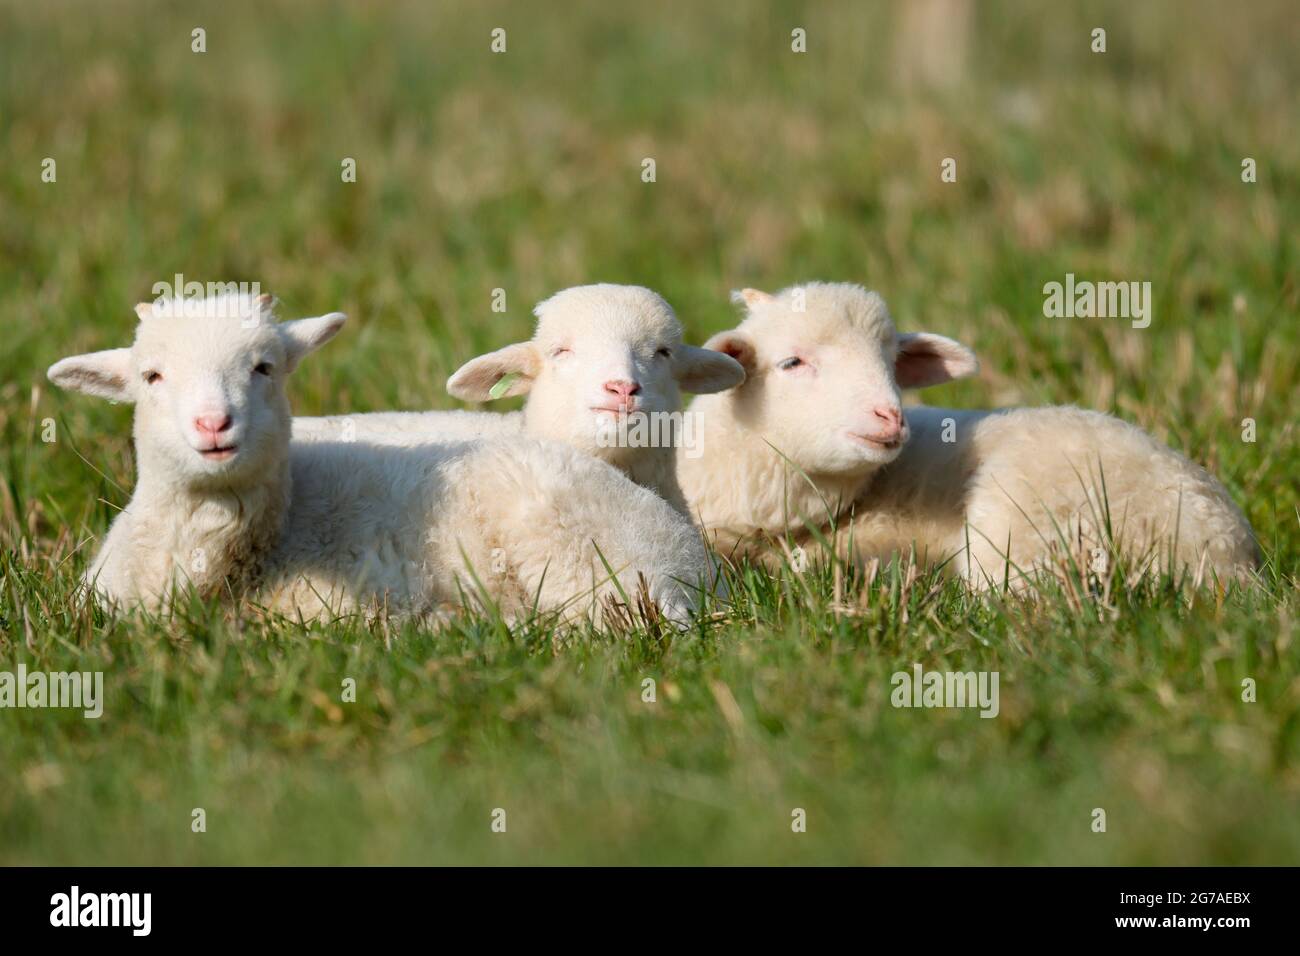 Forest sheep (Landschafrasse, domestic sheep breed) lambs lying on a pasture, Germany, Stock Photo